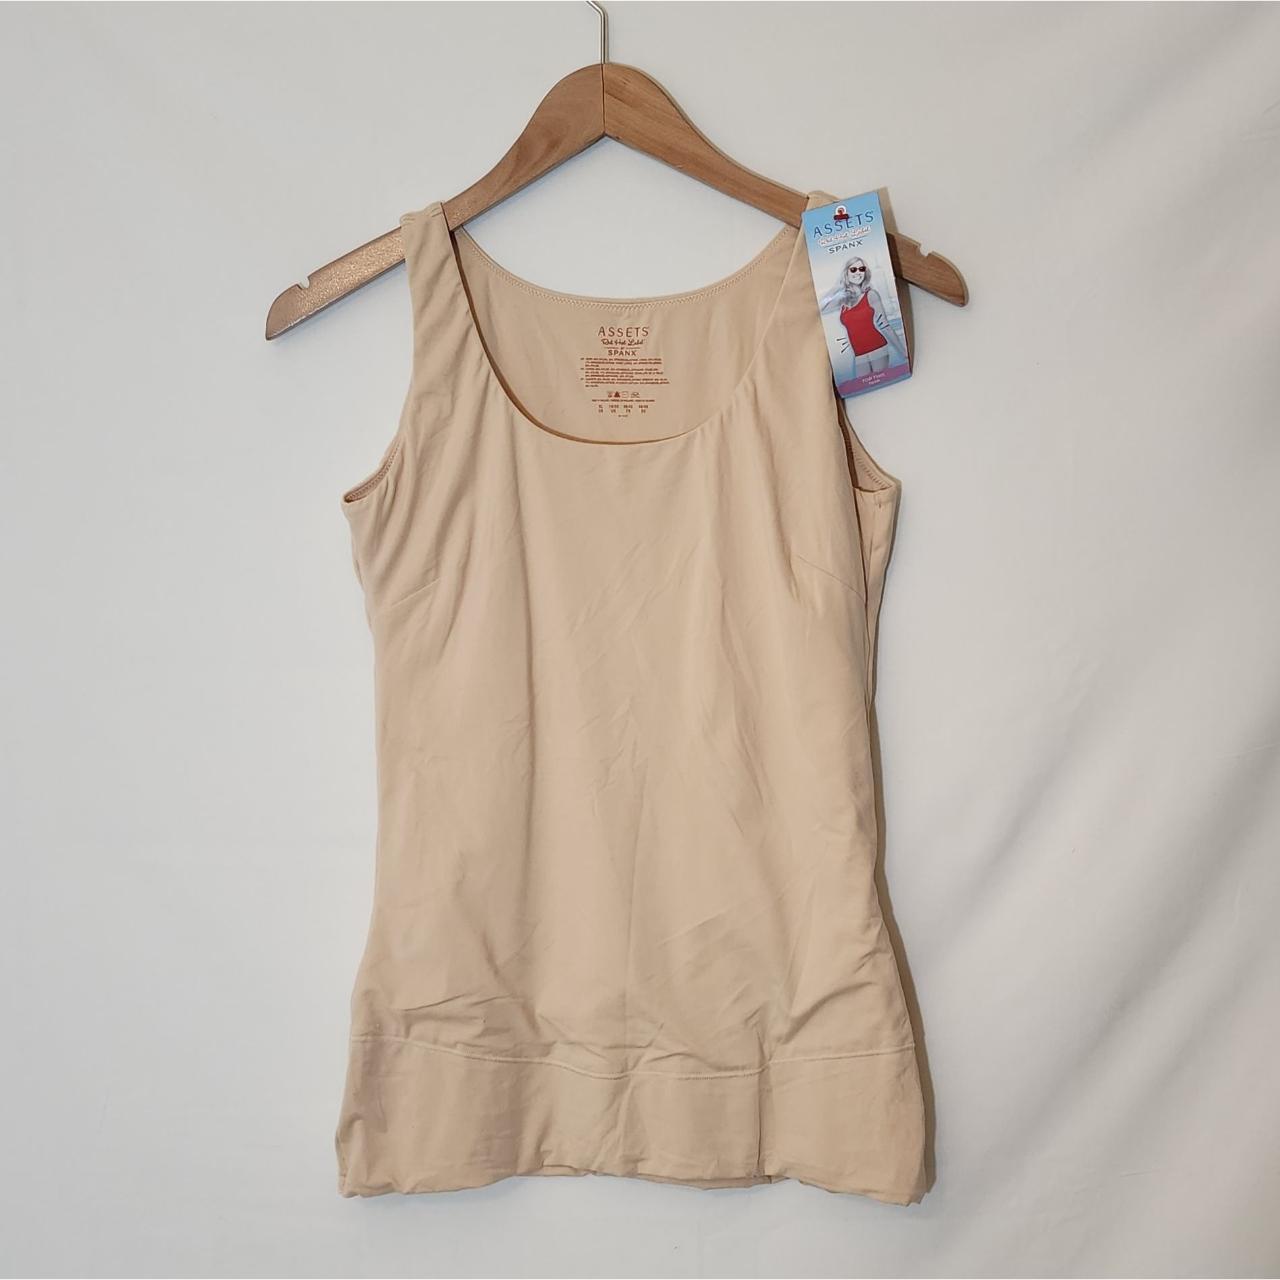 Assets by Spanx nude Top This Tank top, ⚫Size